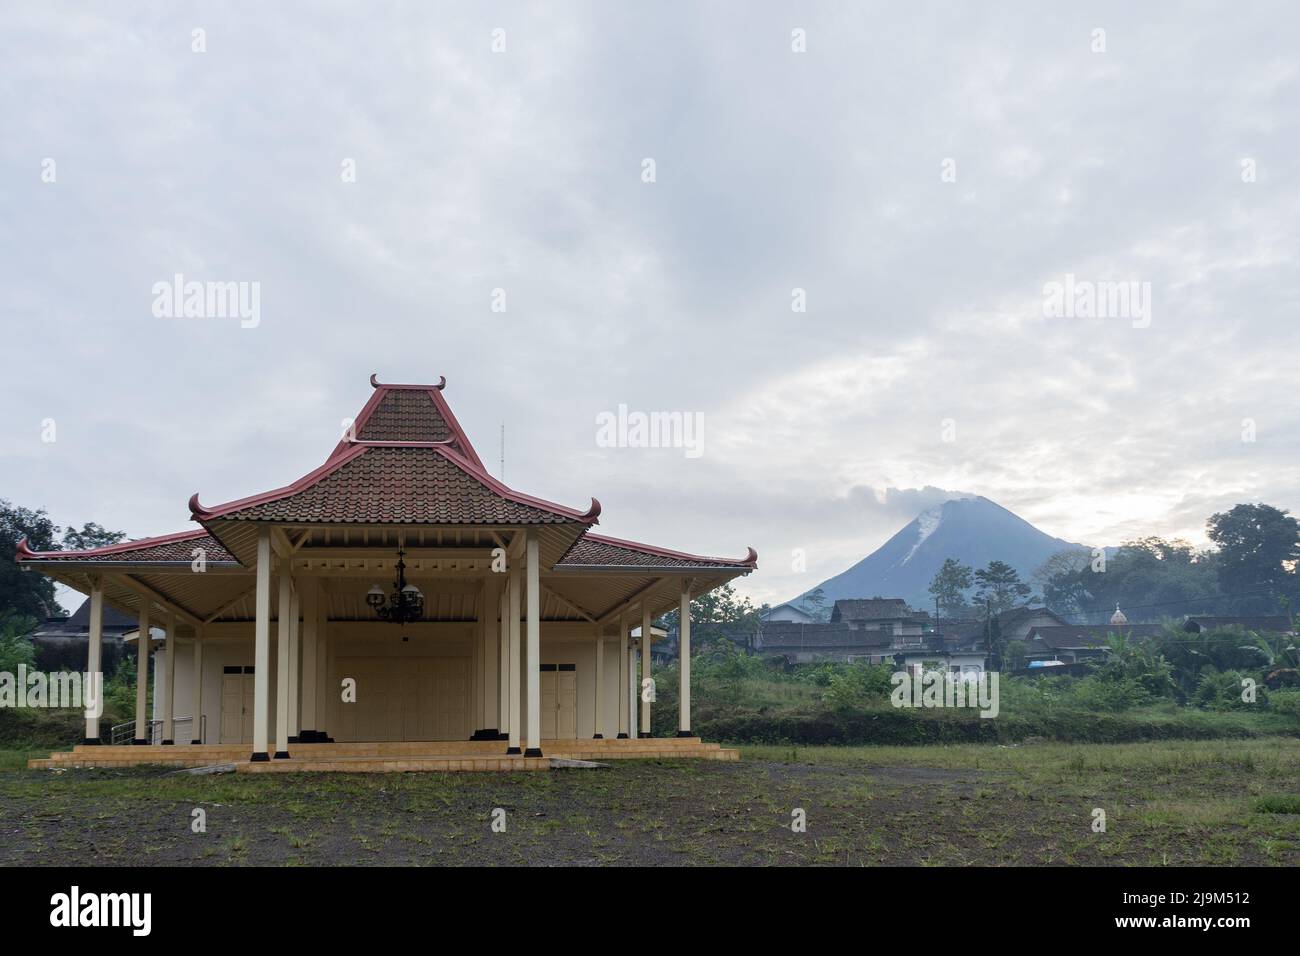 Mount Merapi spews volcanic ashes and materials as seen from Girikerto village in Sleman, Yogyakarta, Indonesia with Joglo Pendopo building. Stock Photo